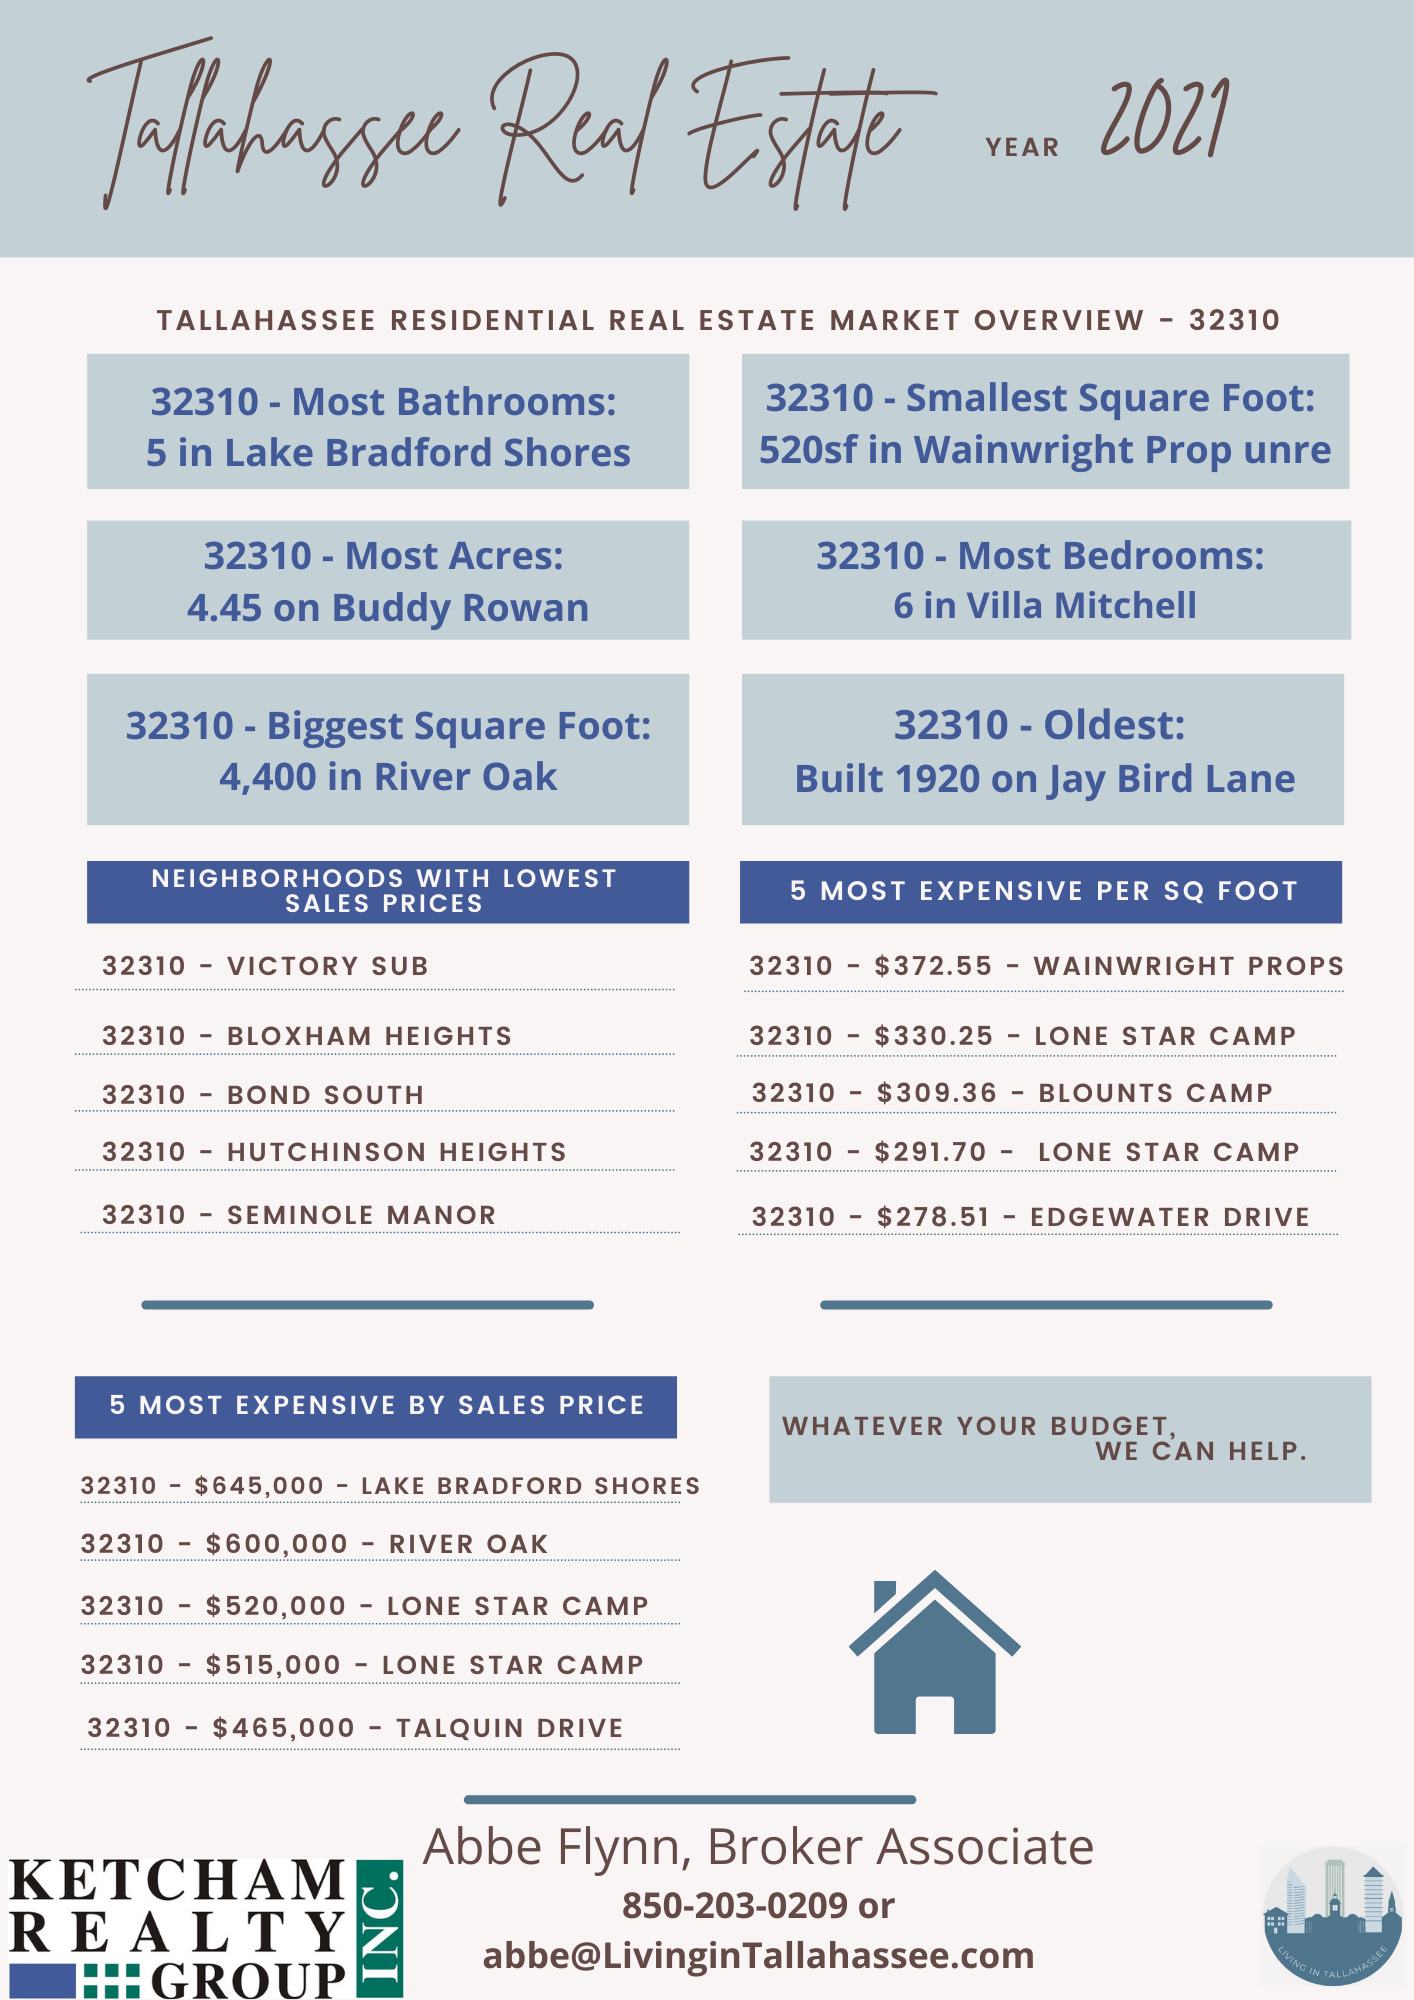 Overview of real estate sold in 2021 in Tallahassee zip code 32310. Most bathrooms was 5 sold in Lake Bradford Shores. Smallest square footage was 510sf in Wainwrights Prop. Most acres was 4.45 on Buddy Rowan Rd. Most bedrooms was 6 sold in Villa Mitchell. Biggest square footage was 4,400 sold in River Oak. Oldest home was built in 1920 sold on Jay Bird Lane.